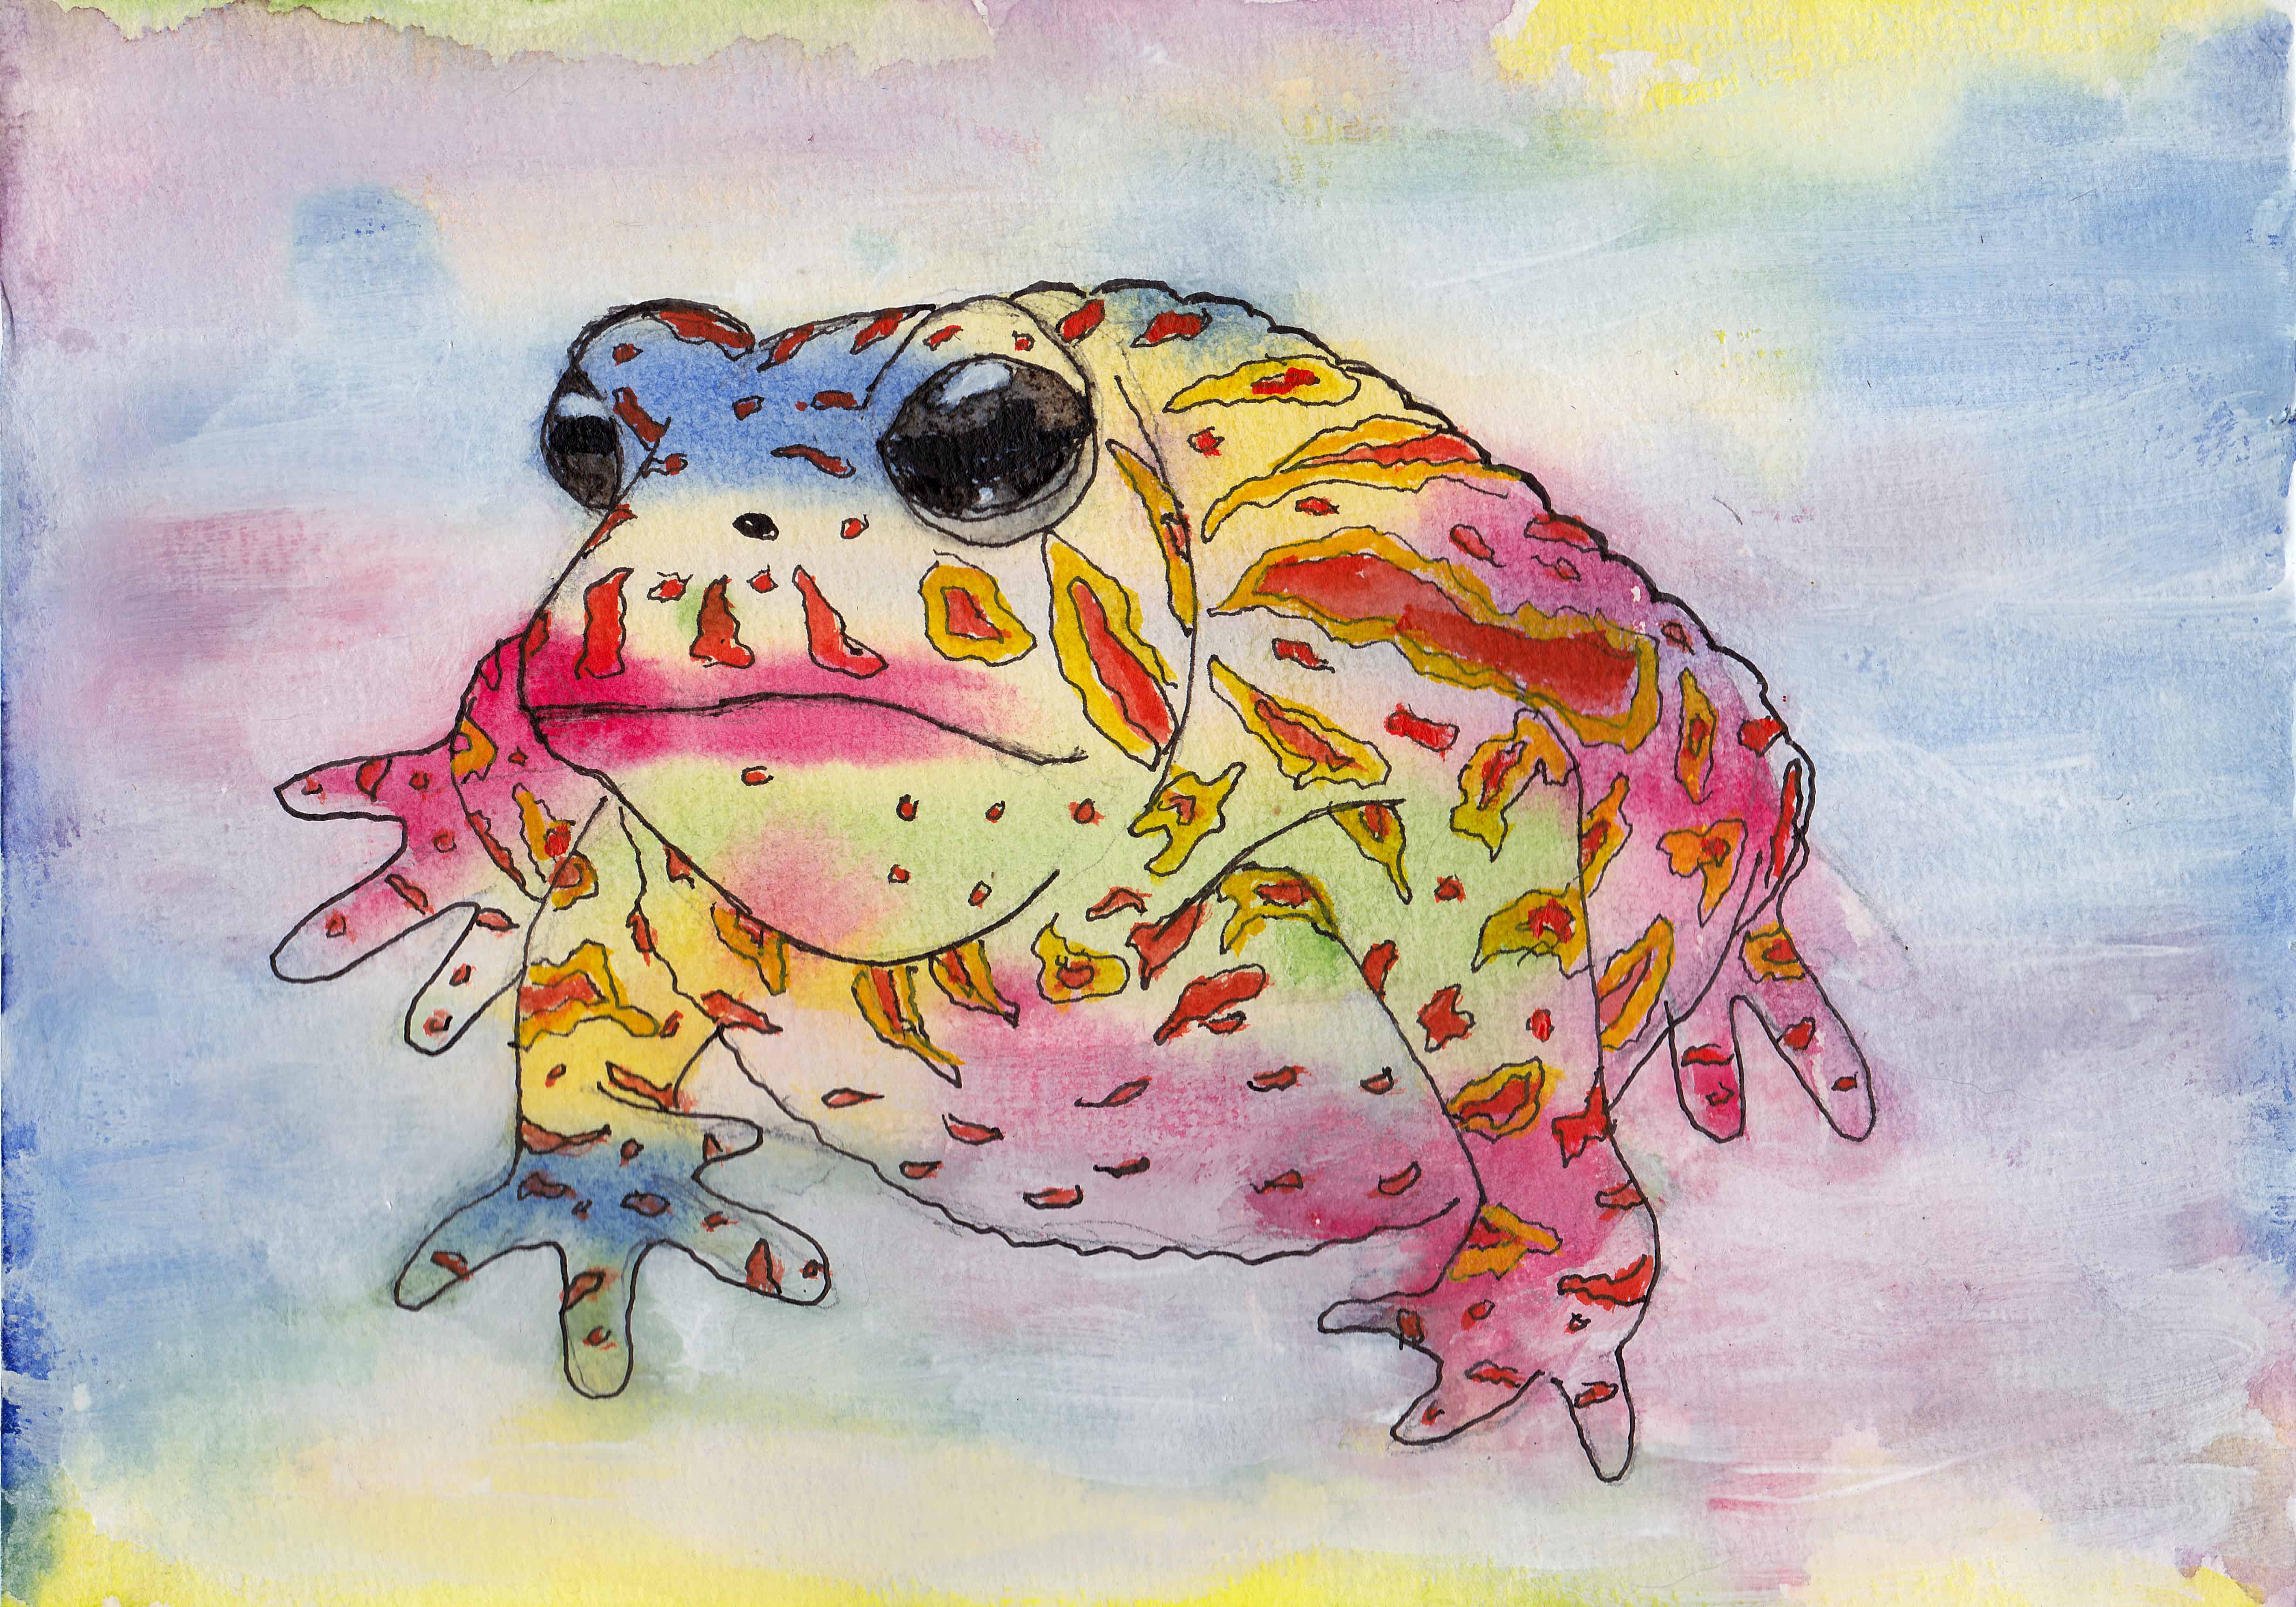 Do You Want More of These Bright and Colorful Amphibians?